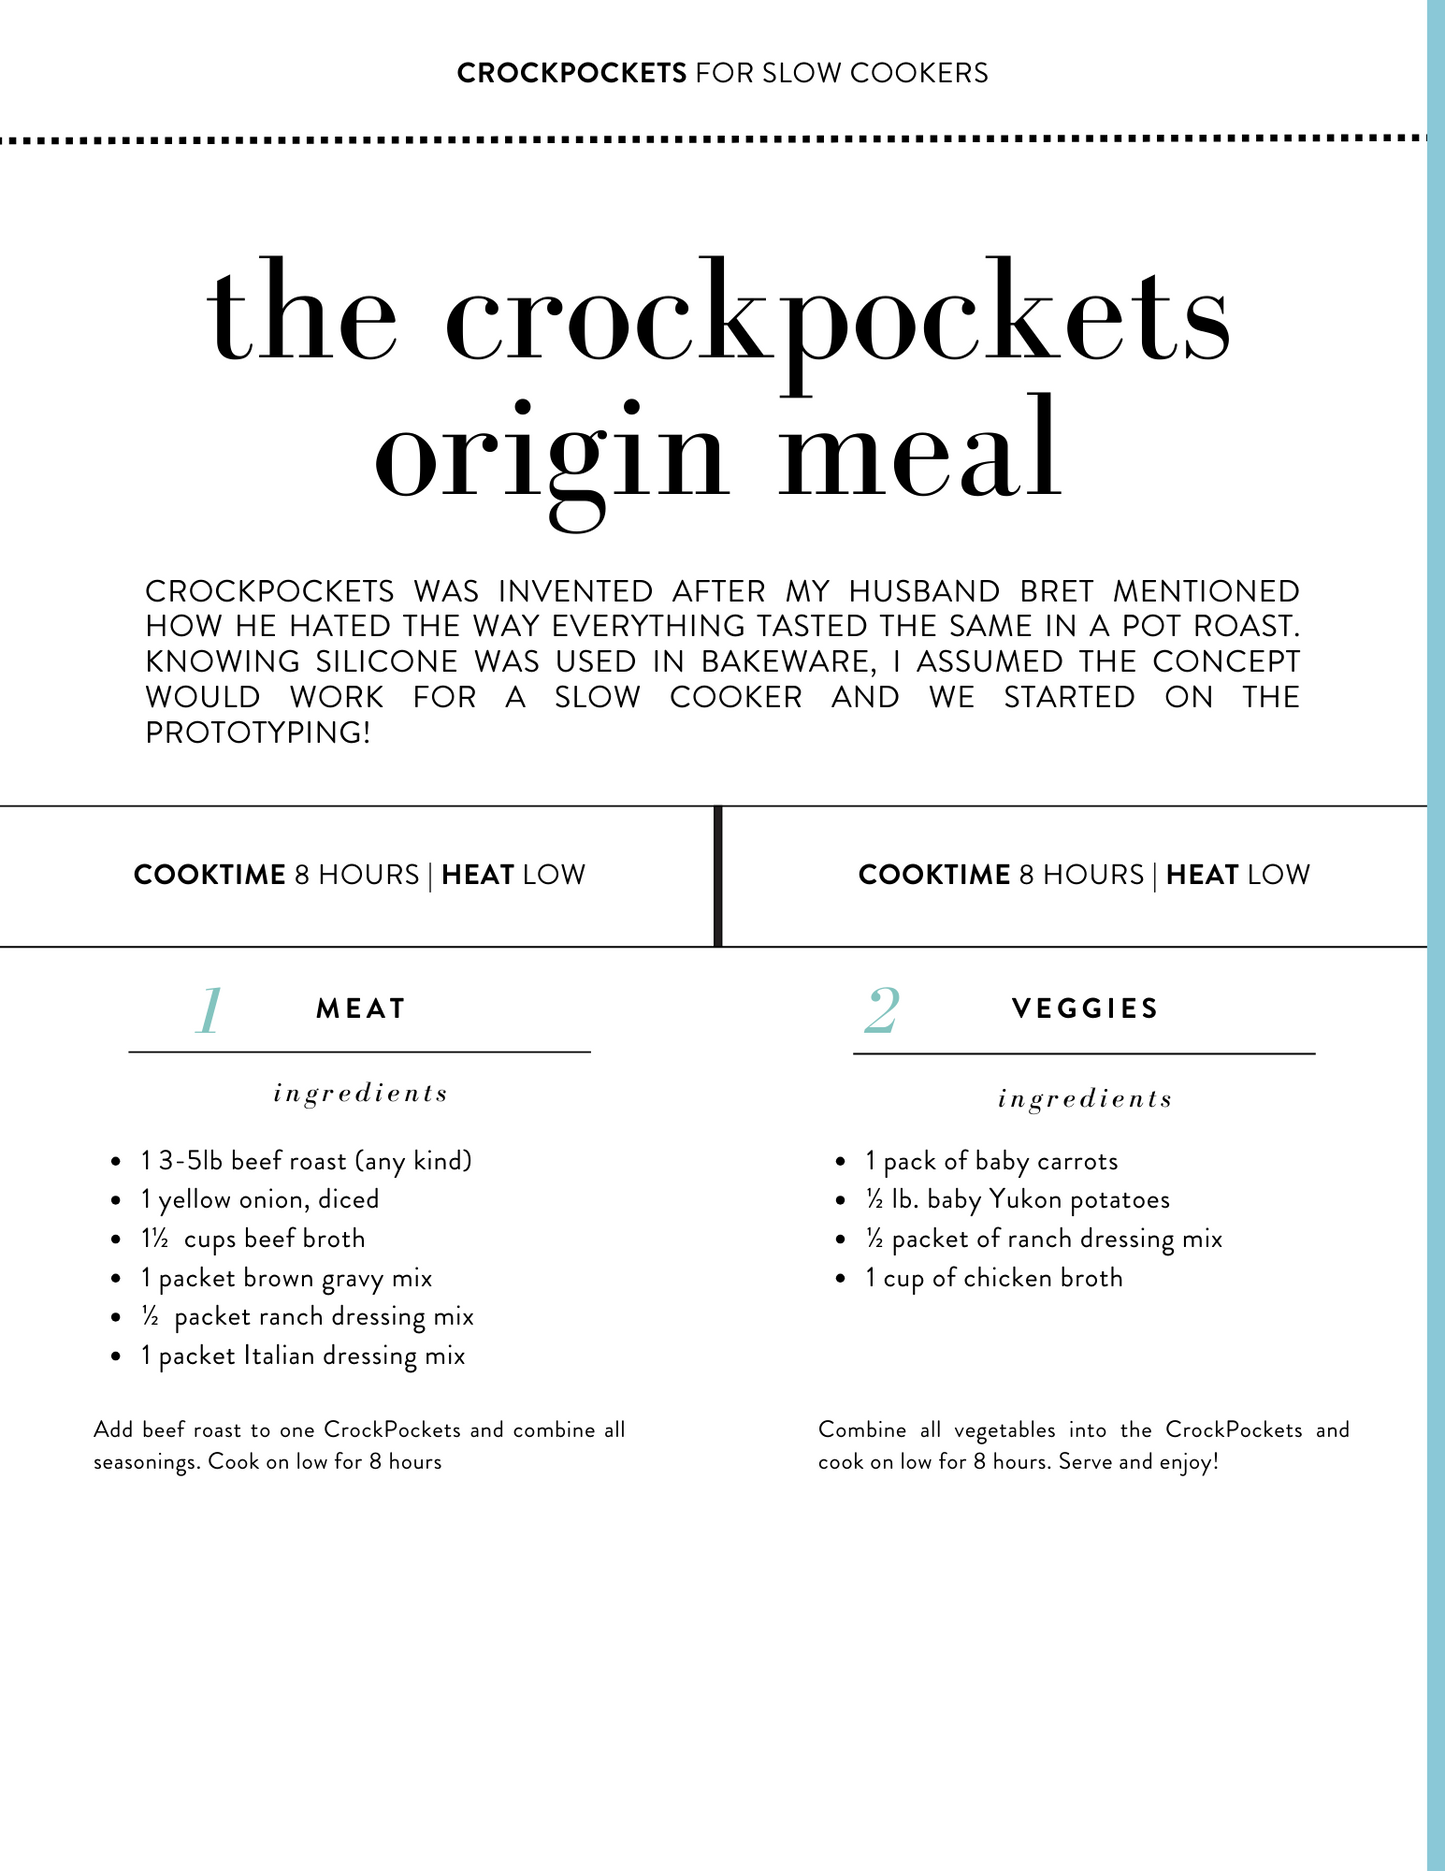 Cooking with CrockPockets One Cookbook, Twice the Recipes